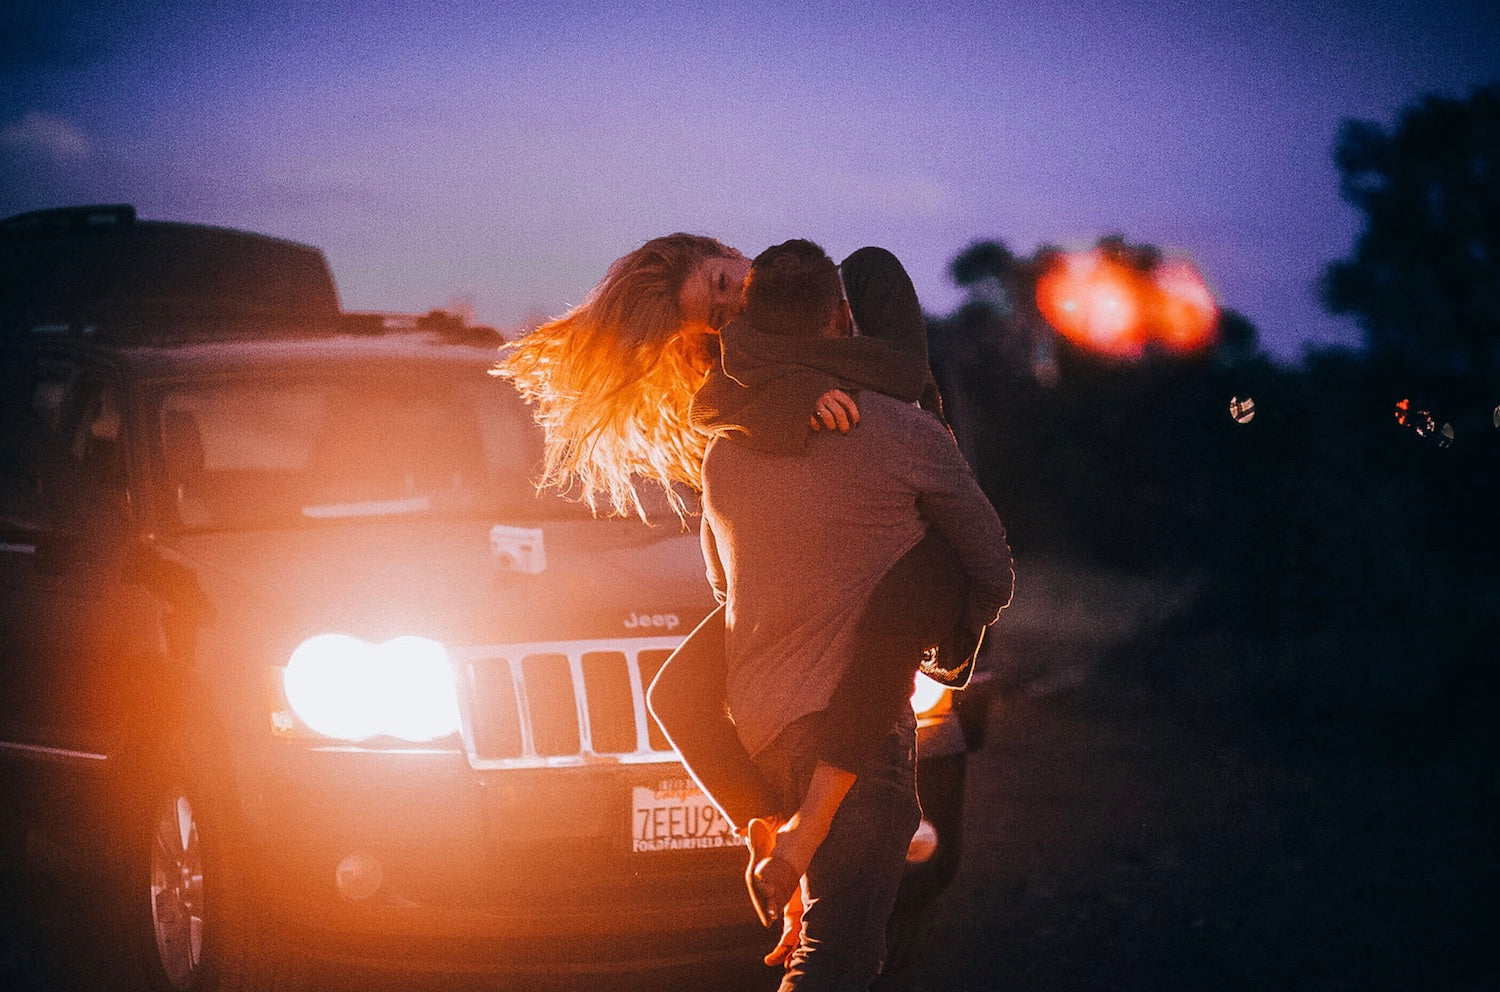 How Adventure Date Ideas Will Transform Your Relationship. Boyfriend carrying girlfriend in his arms as she smiles in front of their Jeep.